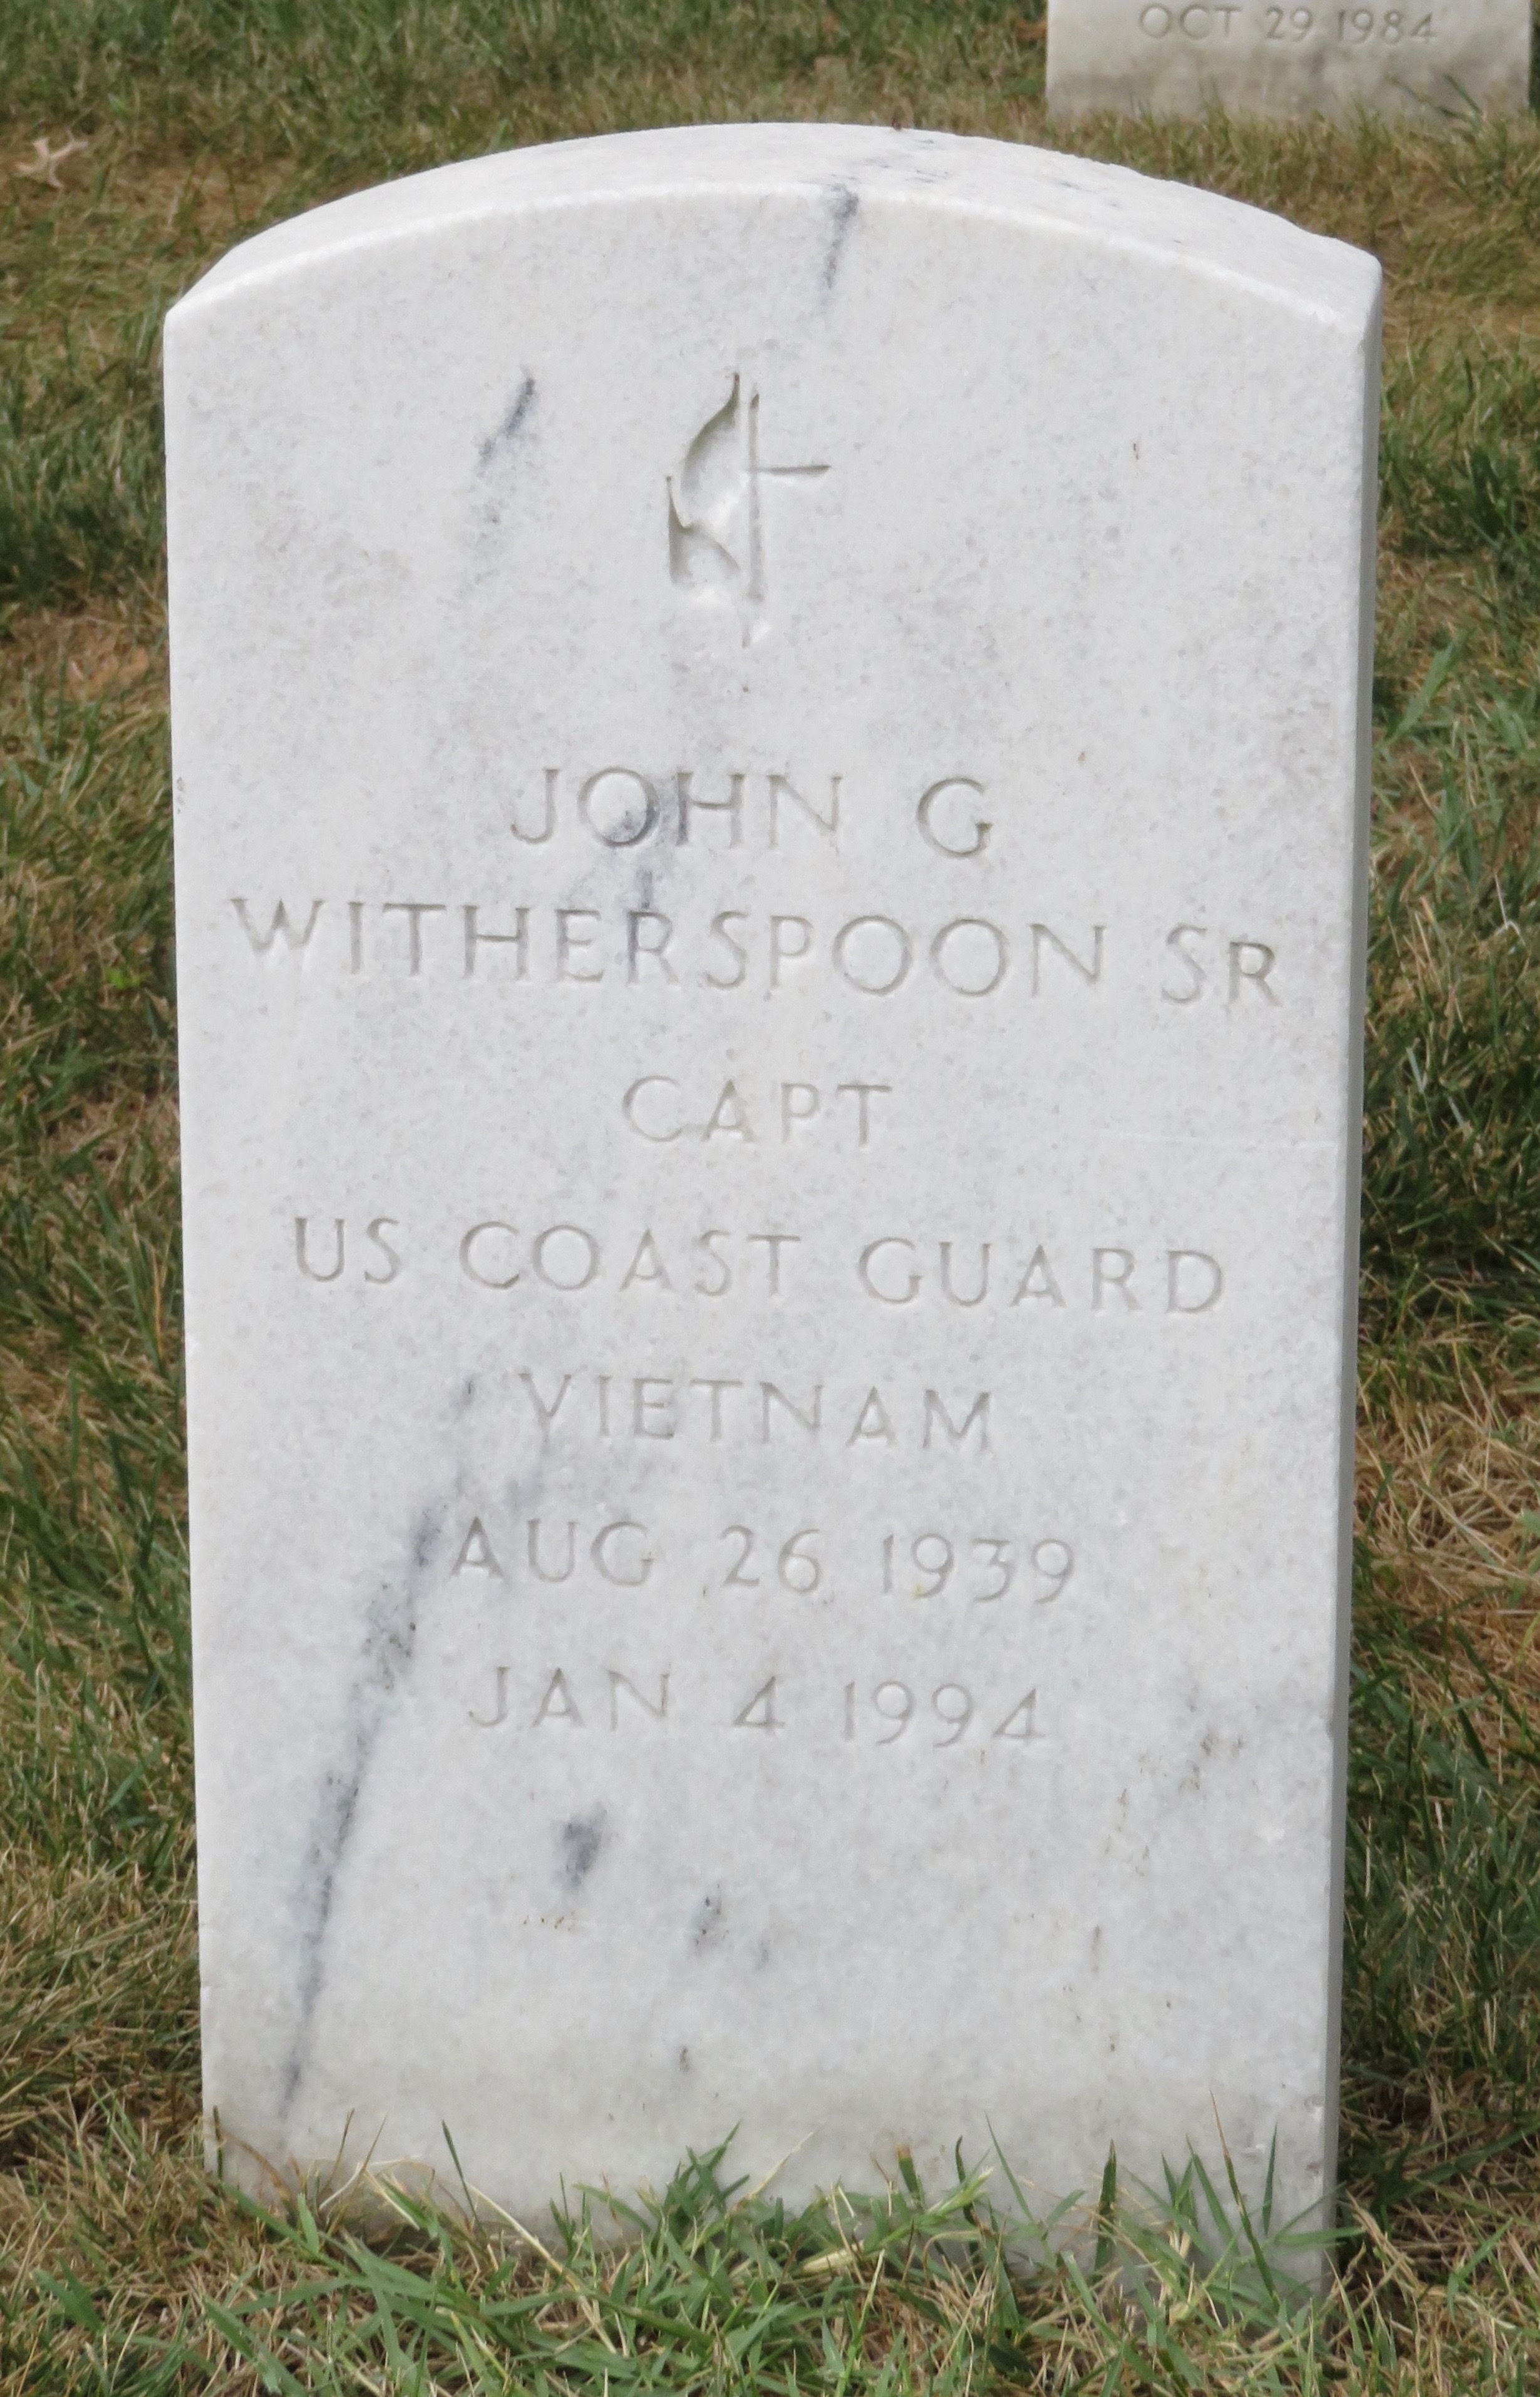 John Gordon Witherspoon’s headstone located at Arlington National Cemetery in Arlington, Virginia. (findagrave.com)